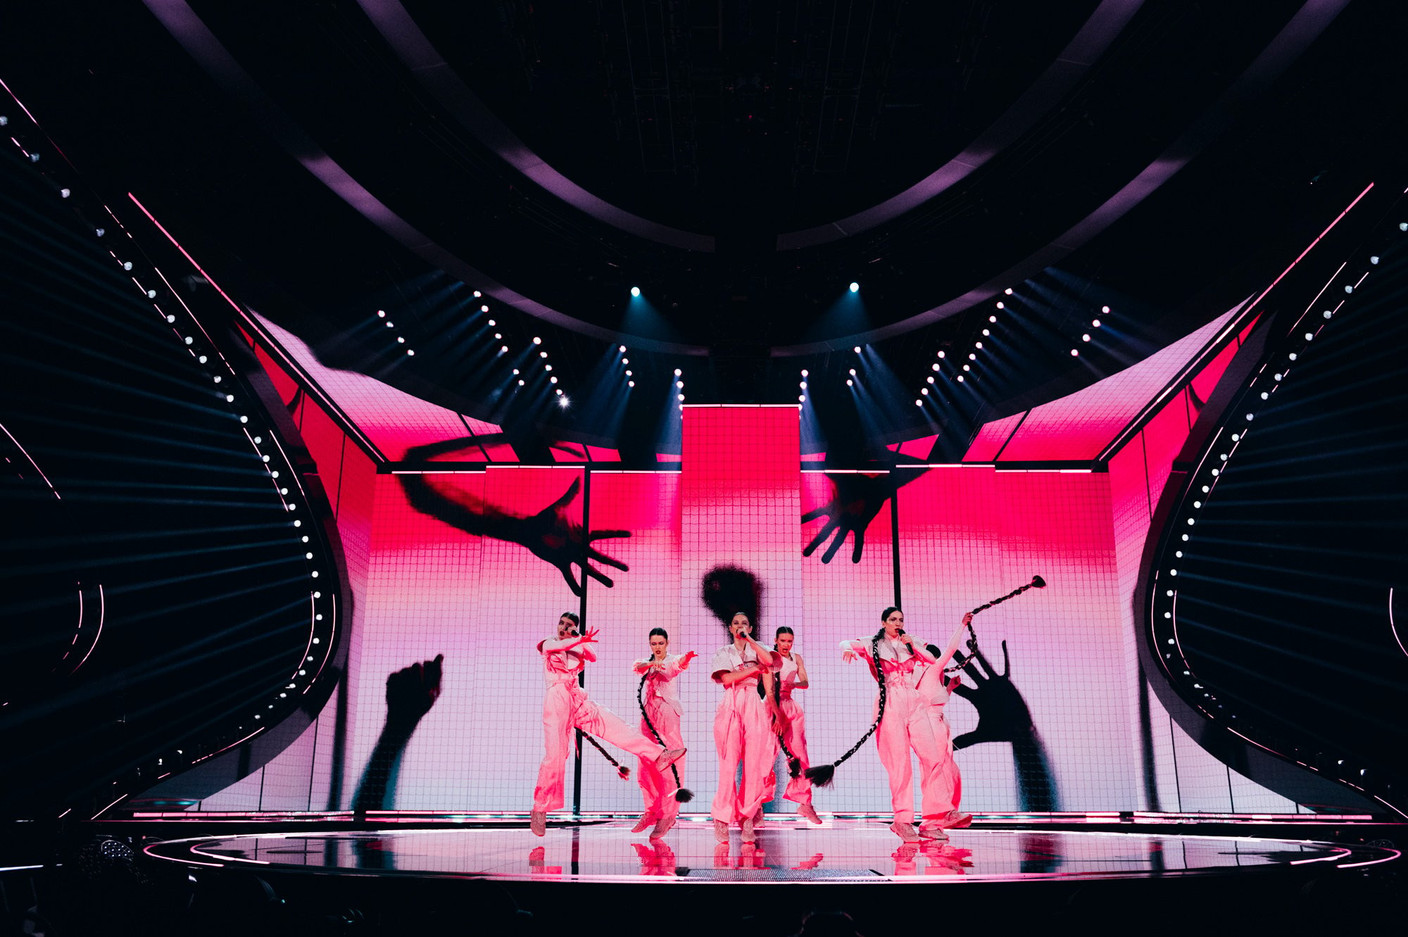 All-female group Vesna, qualified Czechia for the final with their multilingual song “My Sister’s Crown”, during the Eurovision Song Contest in Liverpool, 9 May 2023. Photo: Sarah Louise Bennet/EBU